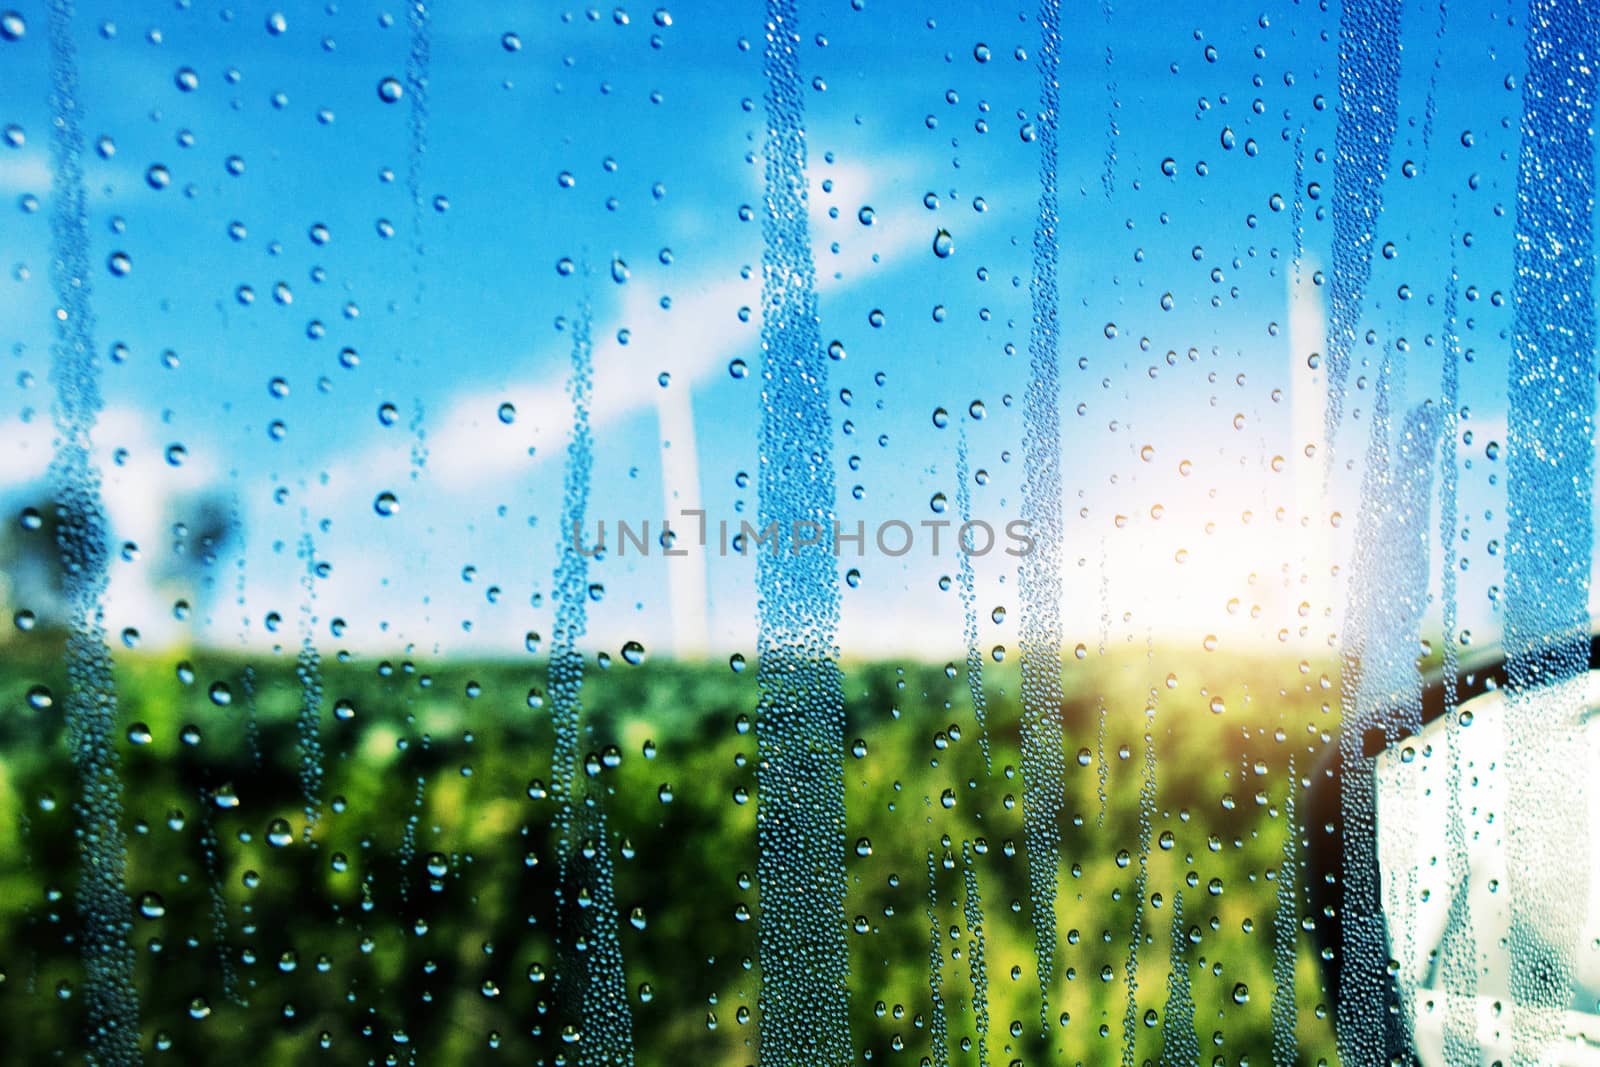 Water droplets on glass  by start08